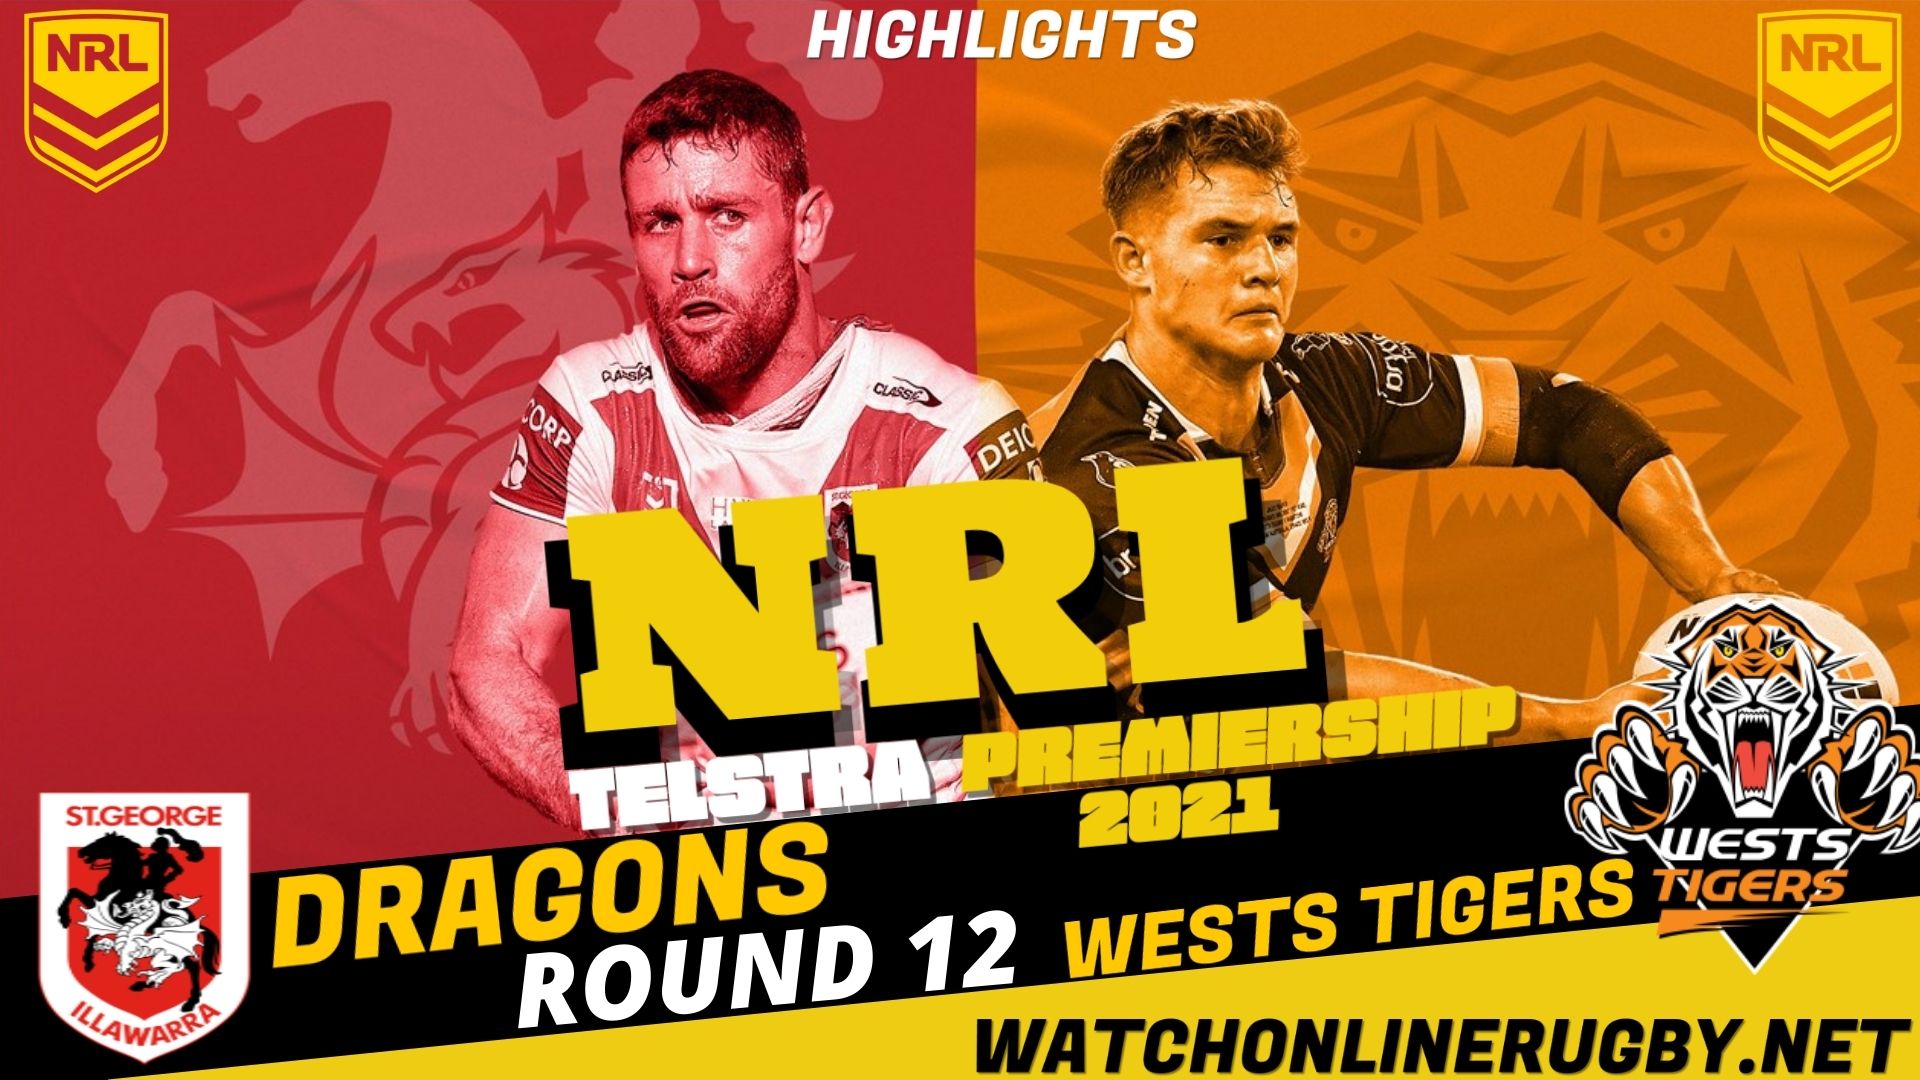 Wests Tigers Vs Dragons Highlights RD 12 NRL Rugby